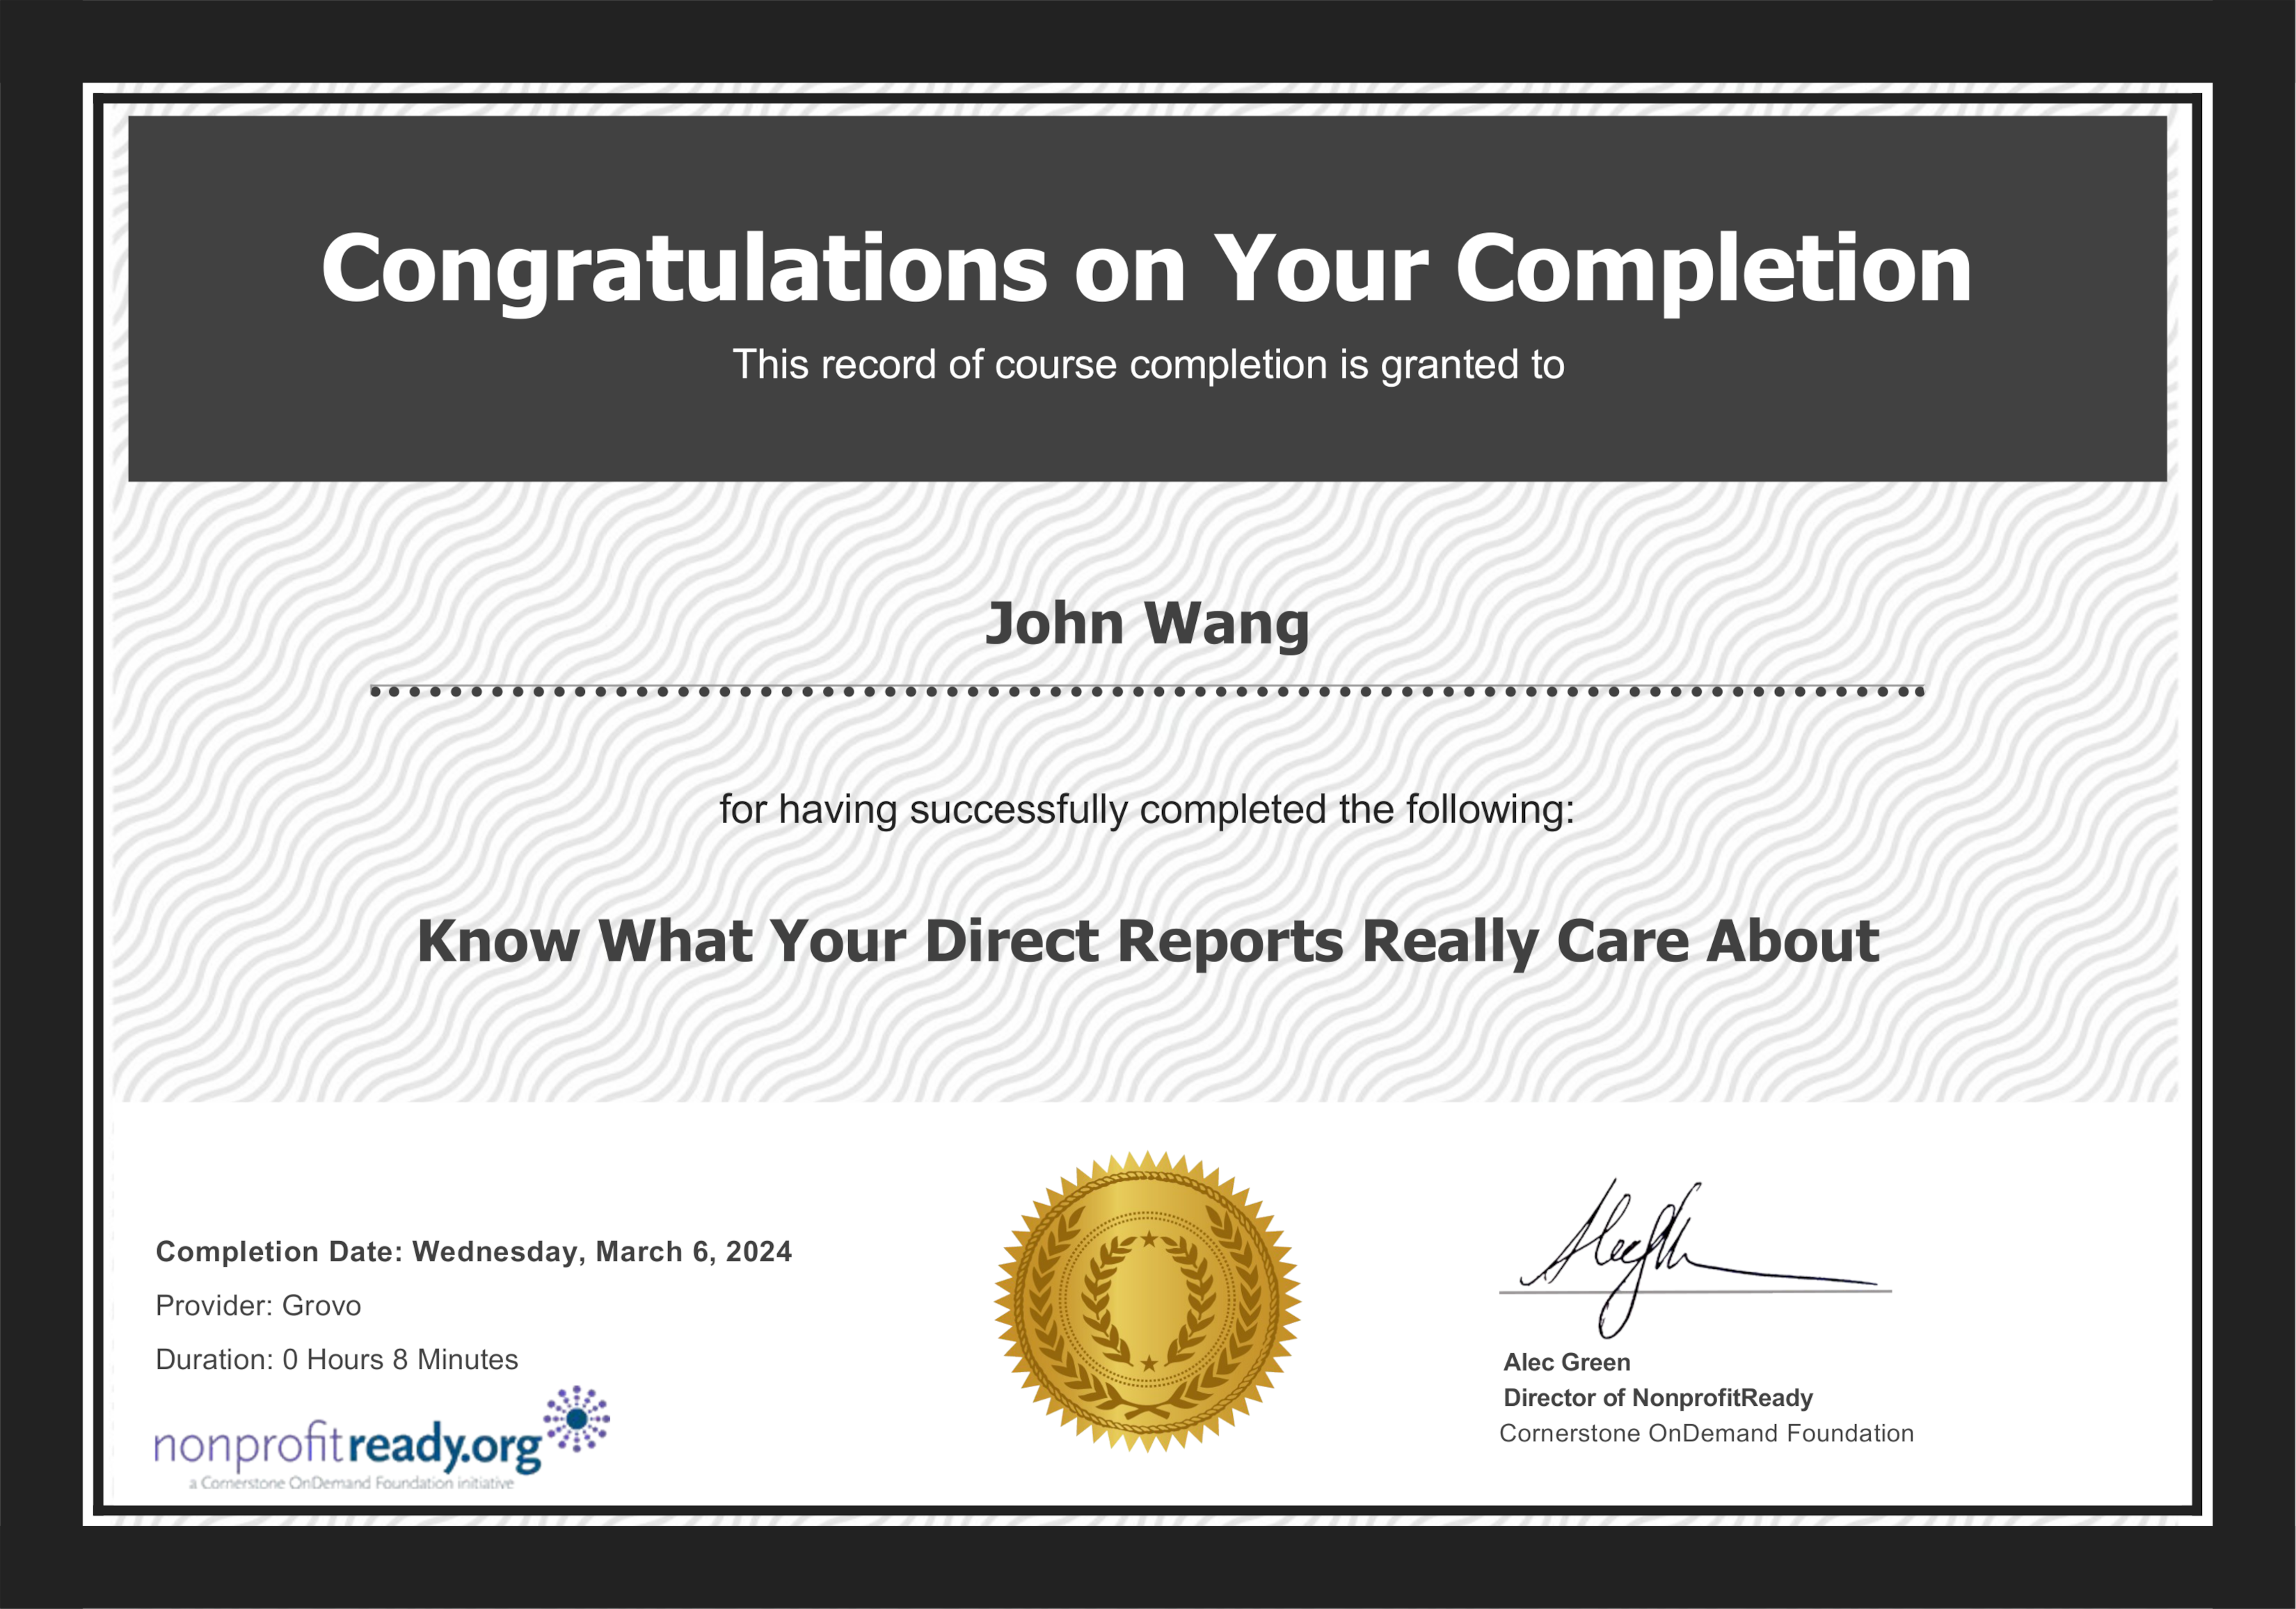 John's Know What Your Direct Reports Really Care About from NonprofitReady